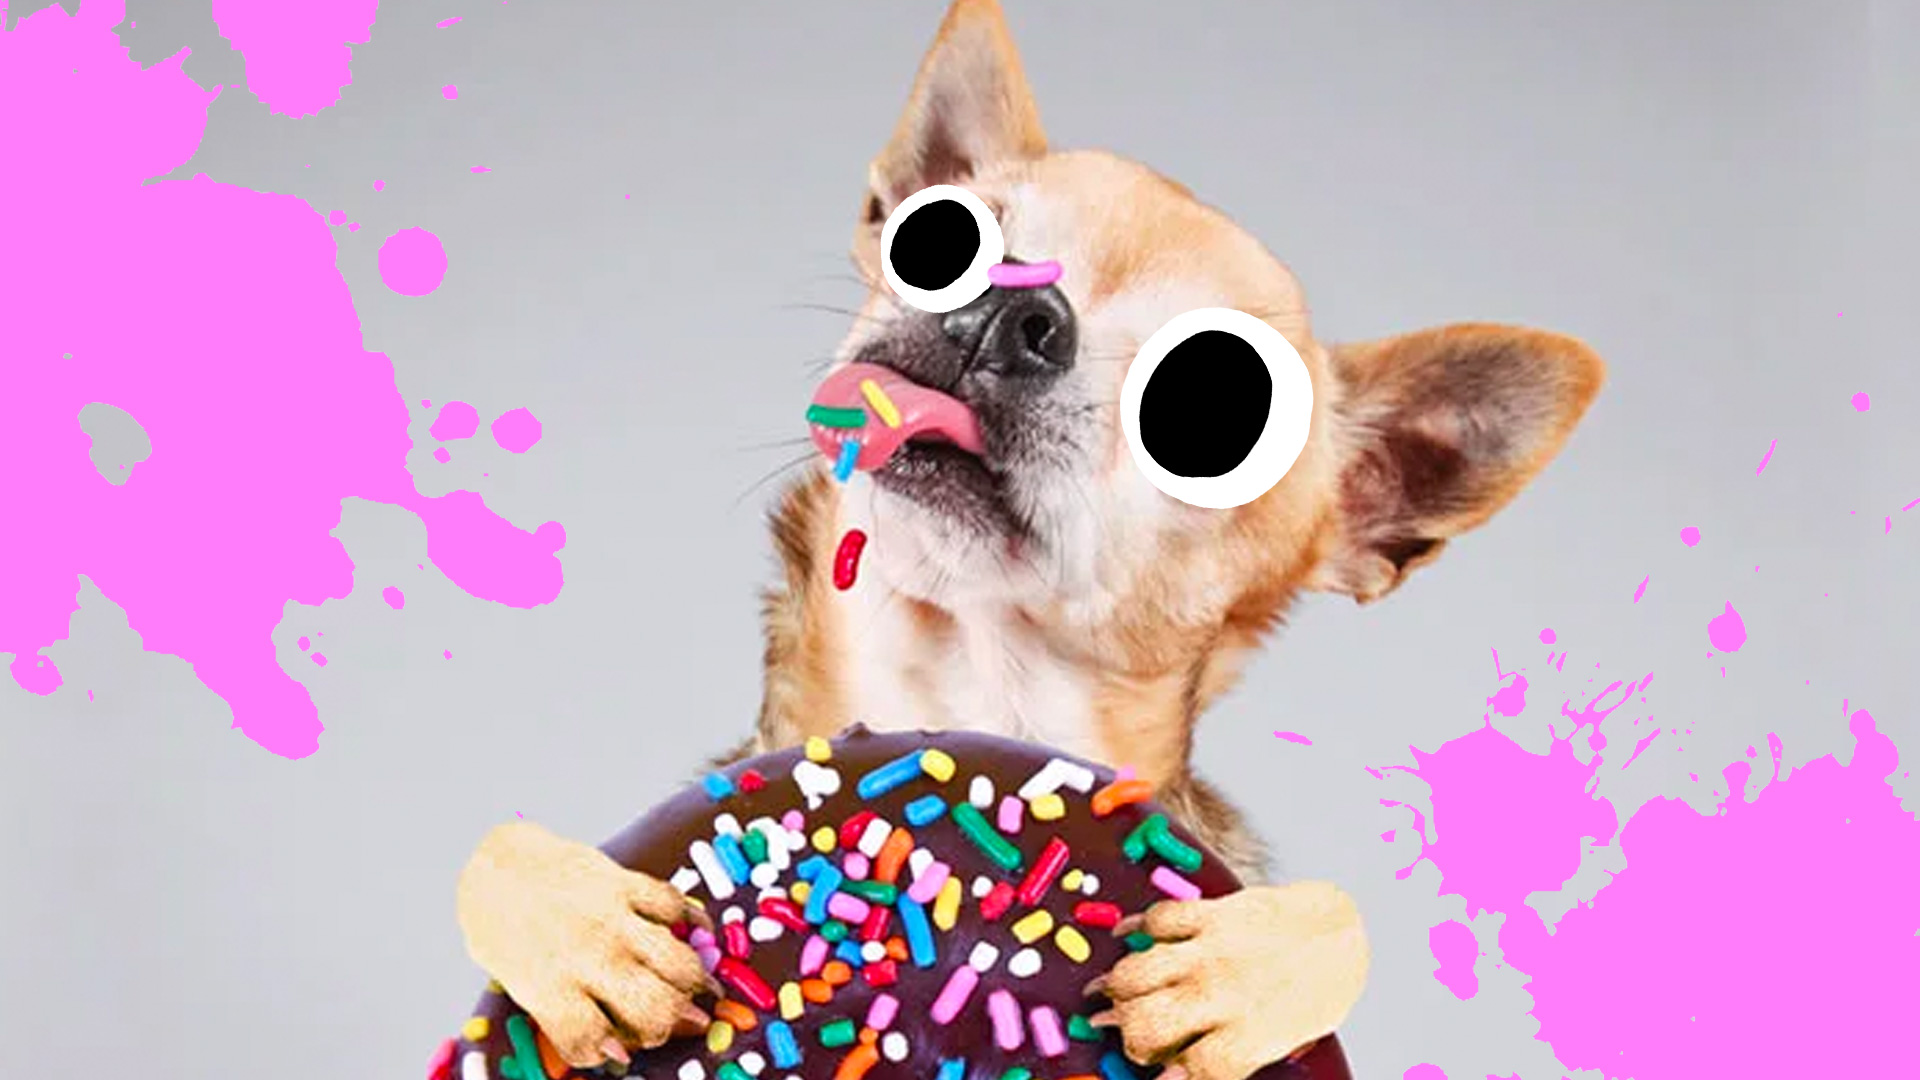 A dog eating a donut